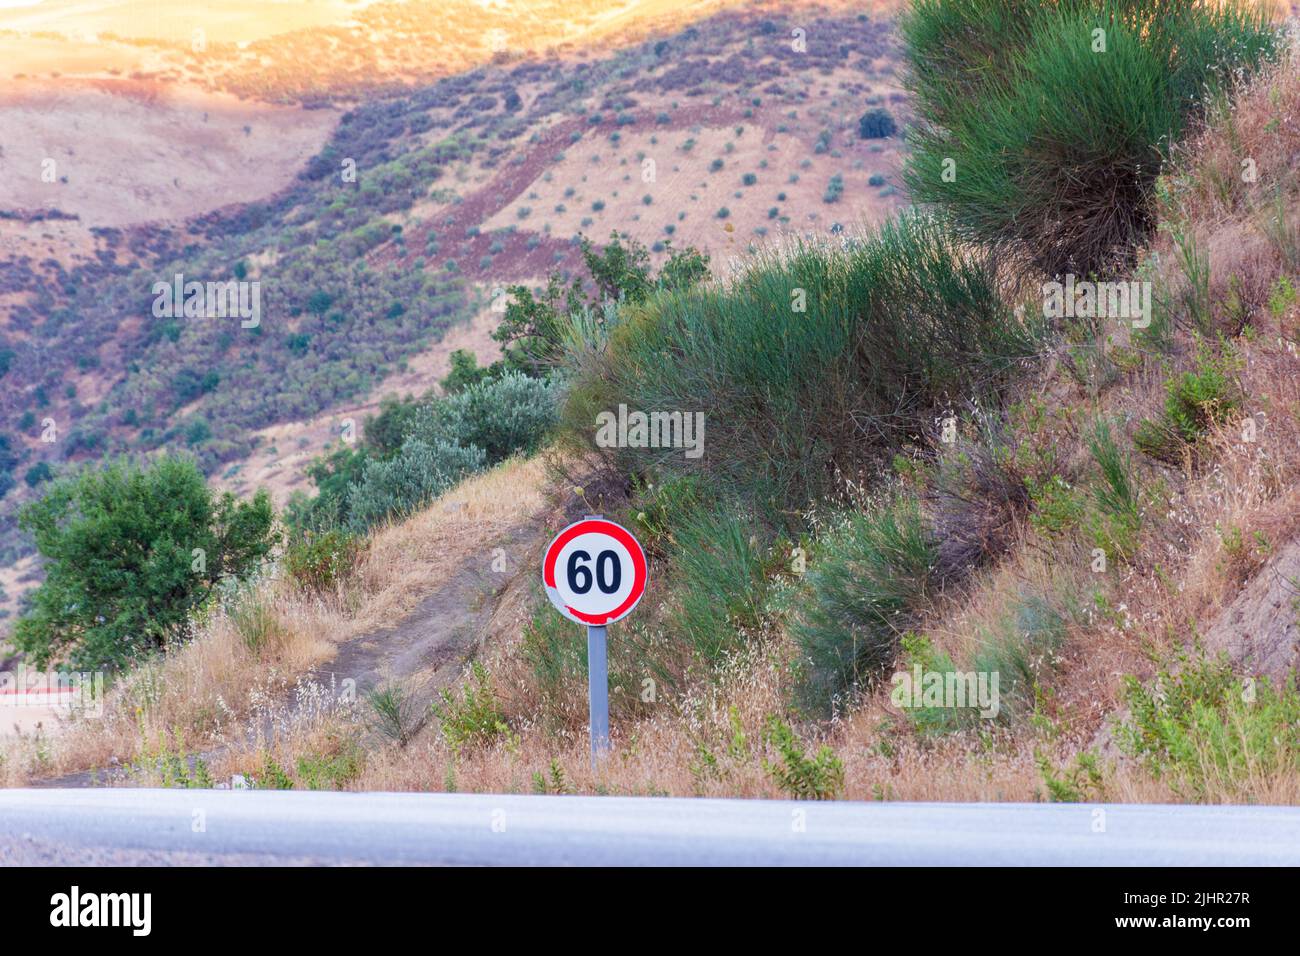 View of a traffic sign with a speed limit of 60 kilometers per hour on a countryside road. Stock Photo